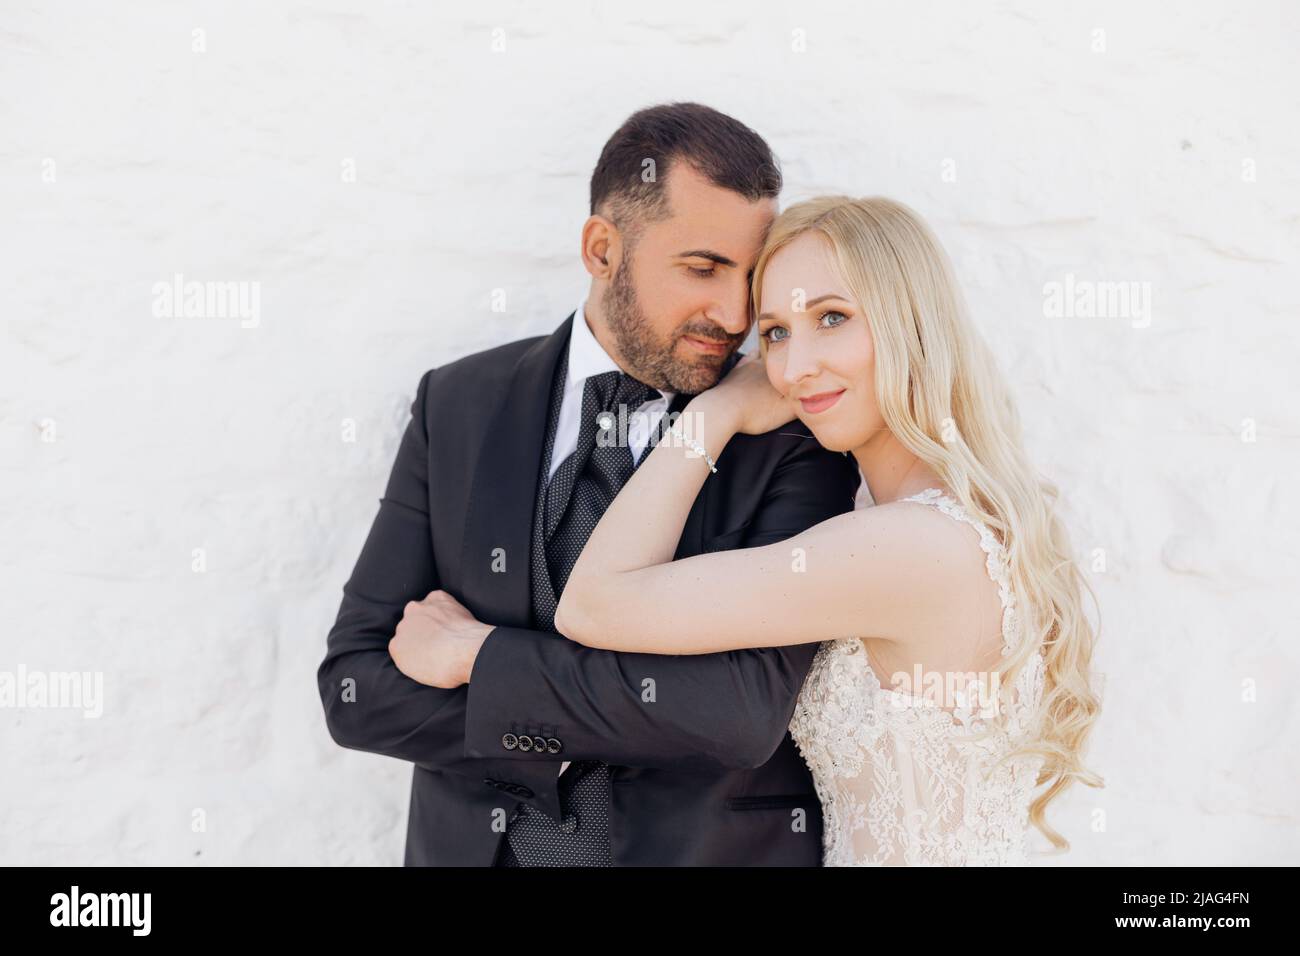 Portrait of young blonde bride in white dress and brunet groom in suit embracing and walking down street in Italy closeup, white wall background Stock Photo